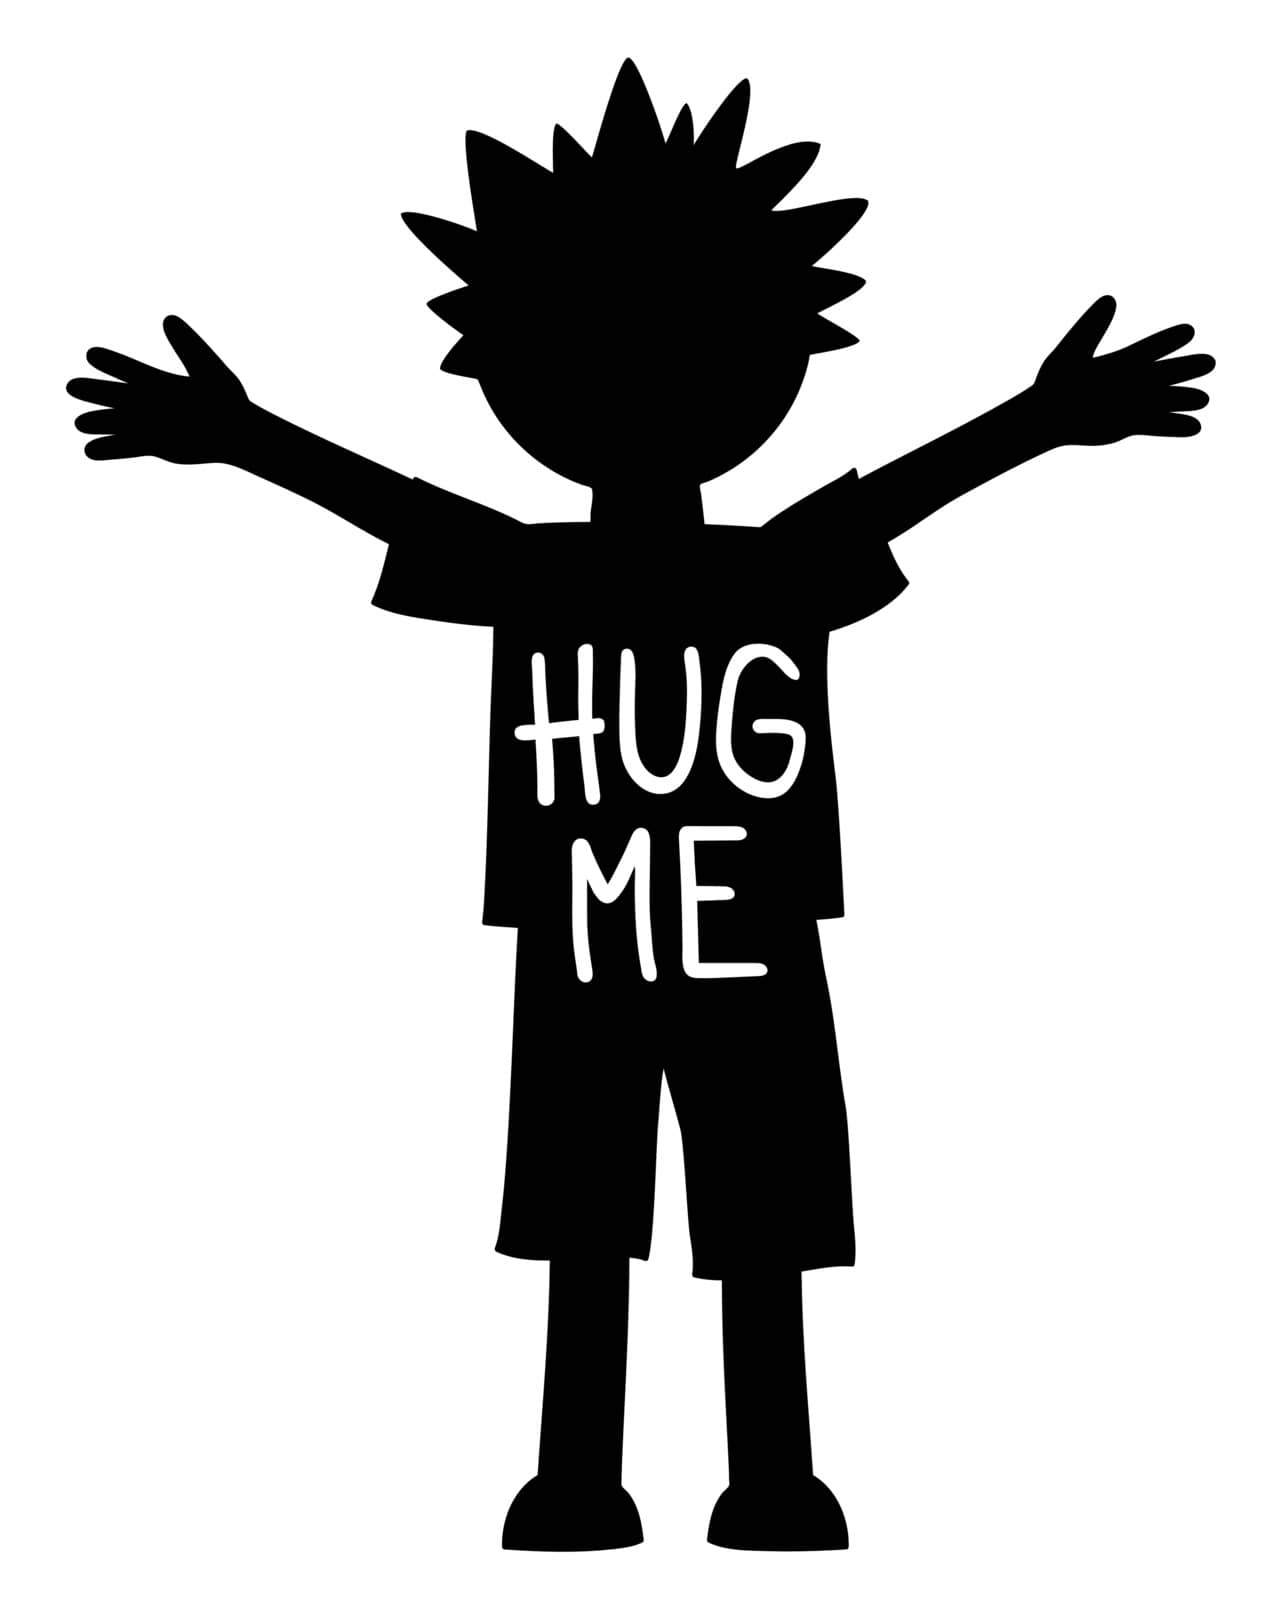 Hug me written on the young boy with open arms and hands, black and white vector